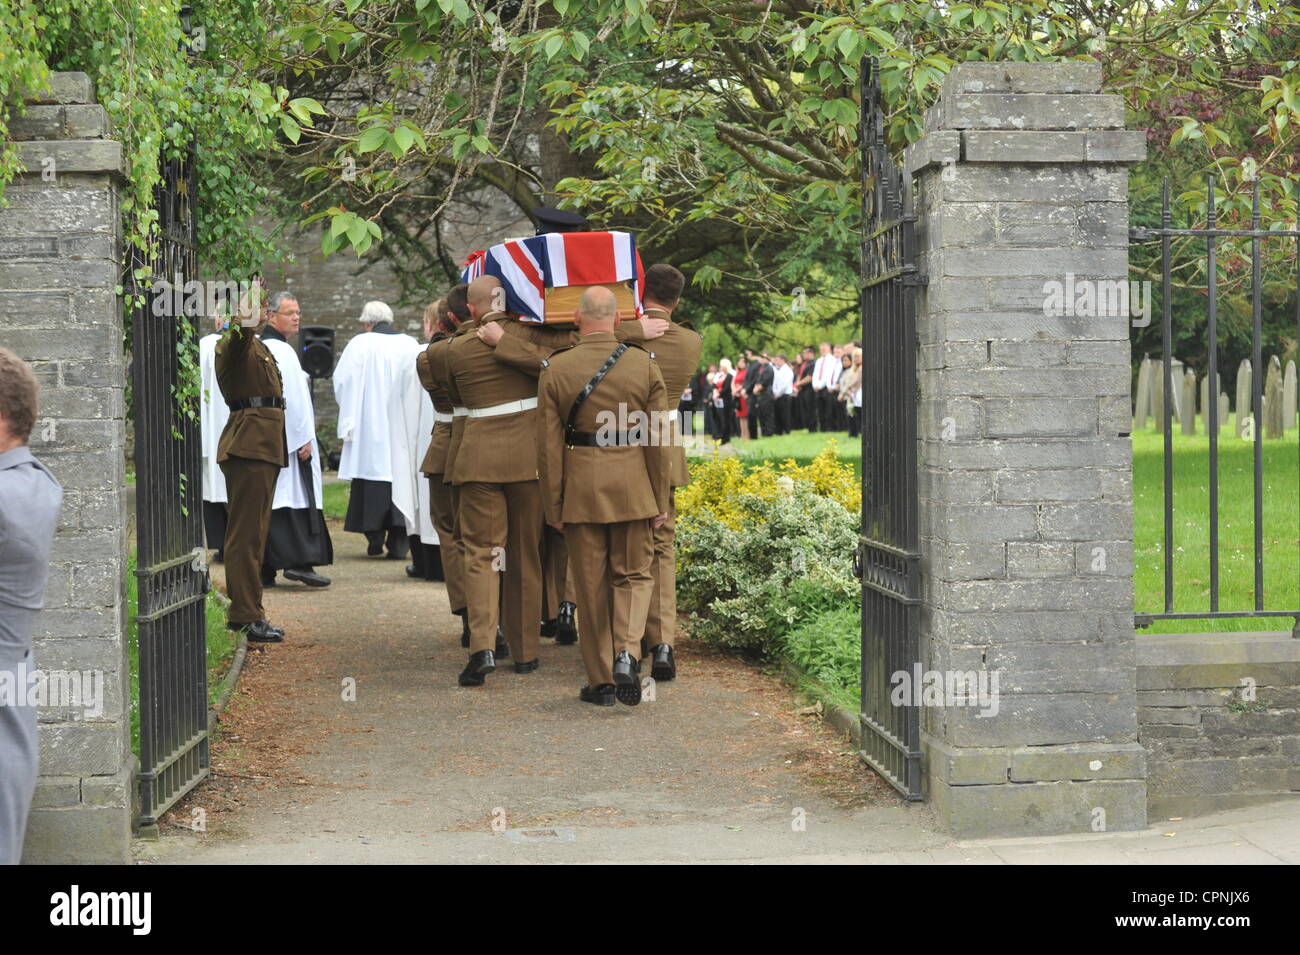 The funeral service for L/Cpl Lee Davies from 1st Battalion Welsh Guards was held at 11:30am on Tuesday 29th May 2012 at St. Mary's Church, Church Street, Cardigan, UK followed by cremation at Parc Gwyn Crematorium, Narberth, Pembrokeshire, UK. L/Cpl Davies was shot dead in Afghanistan on 12/05/2012 Stock Photo